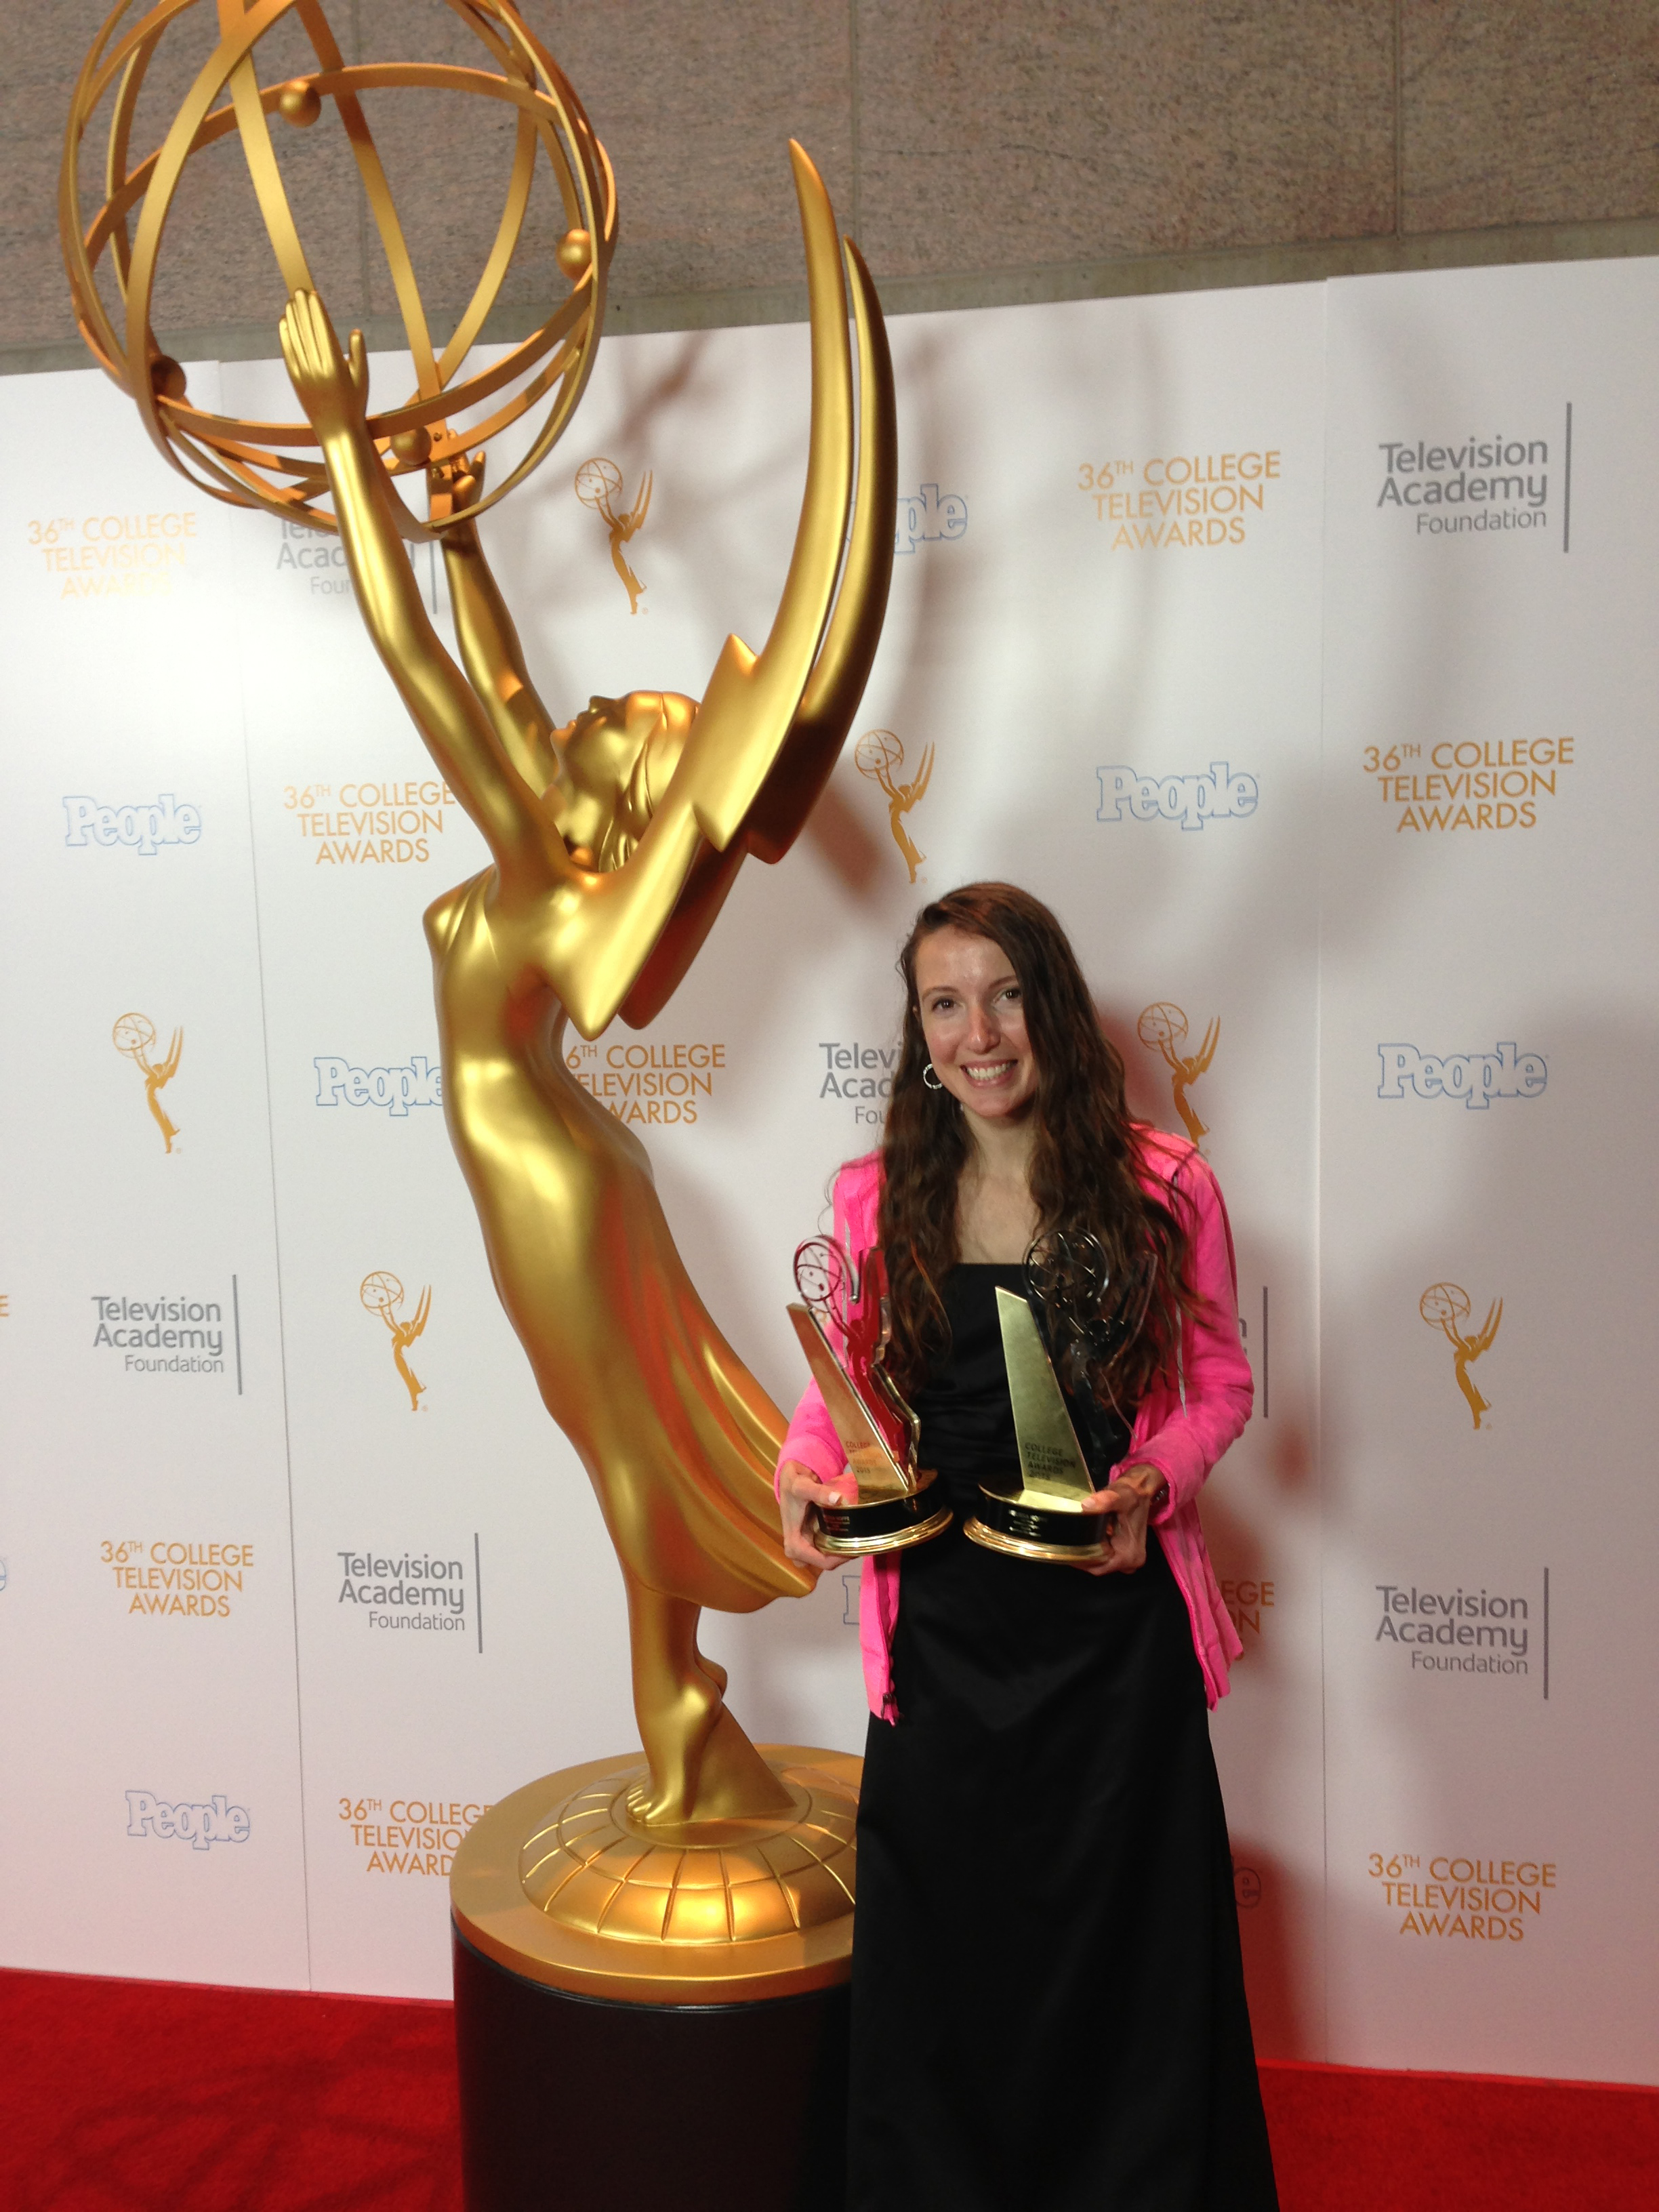 Melissa took home two Emmys from the College Television Awards ceremony on April 23, 2015.